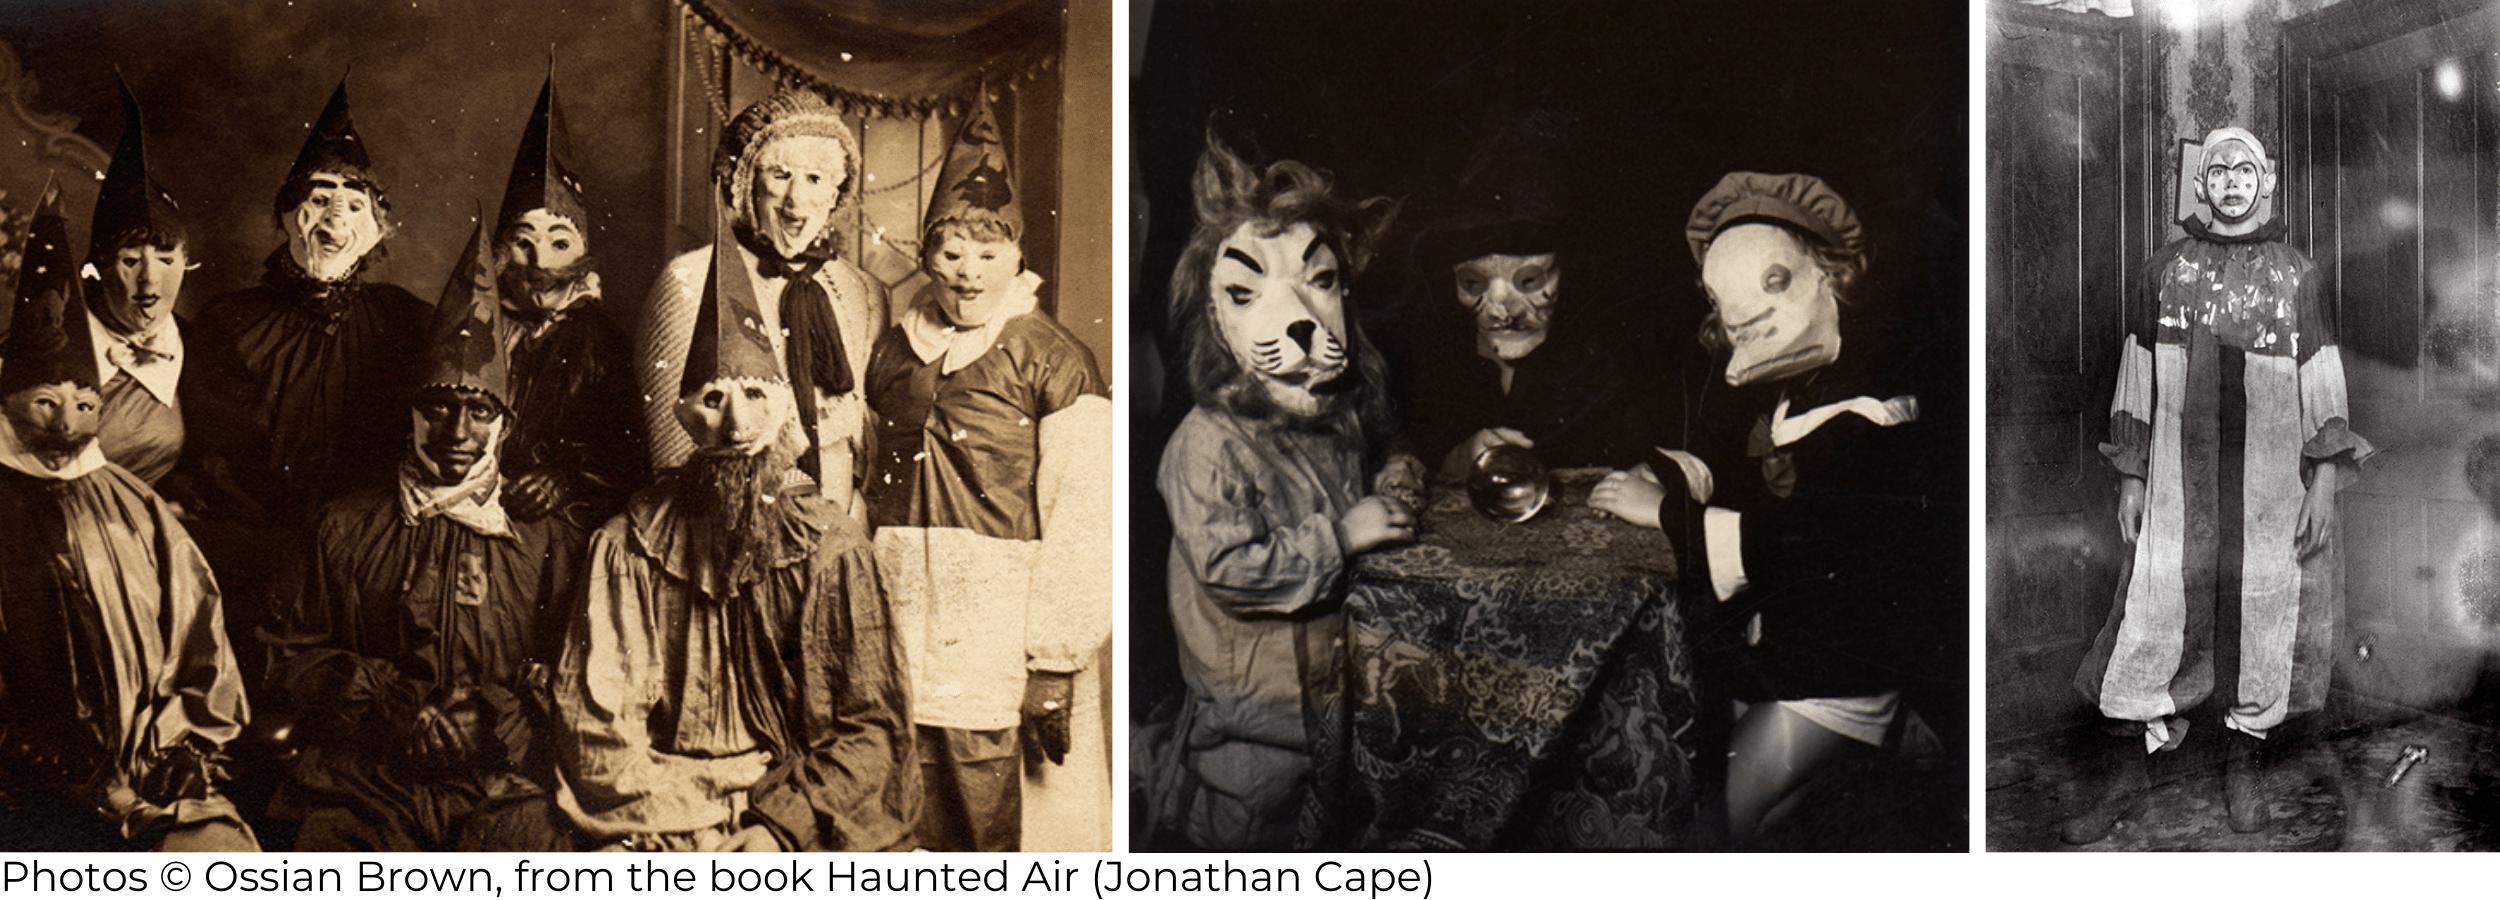 Haunted Air images © Ossian Brown